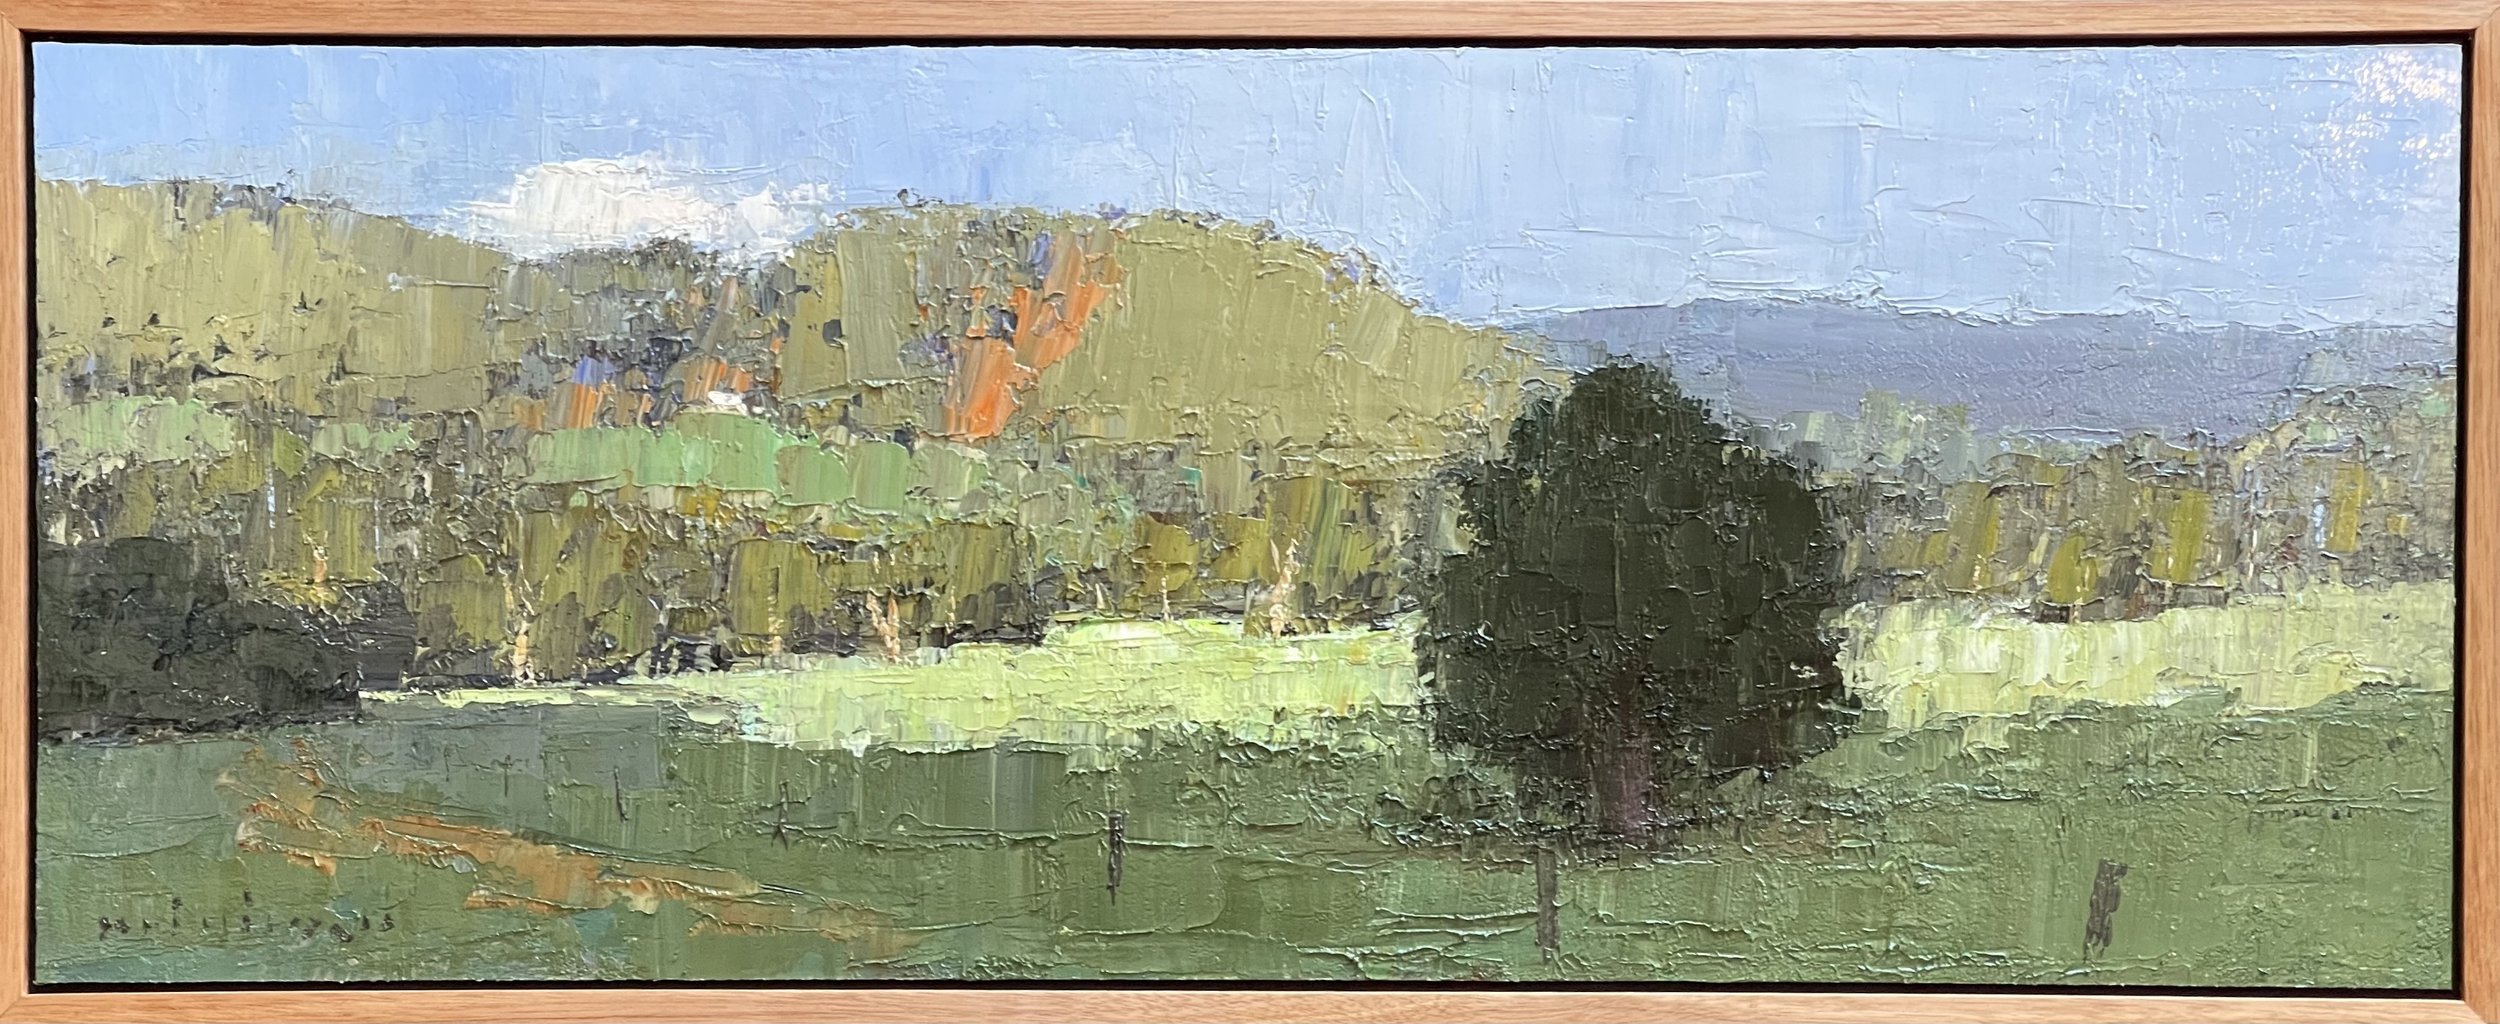  Radiance Beyond The Rolling Hills, Laceys Creek 77x30cm framed oil on board $2100